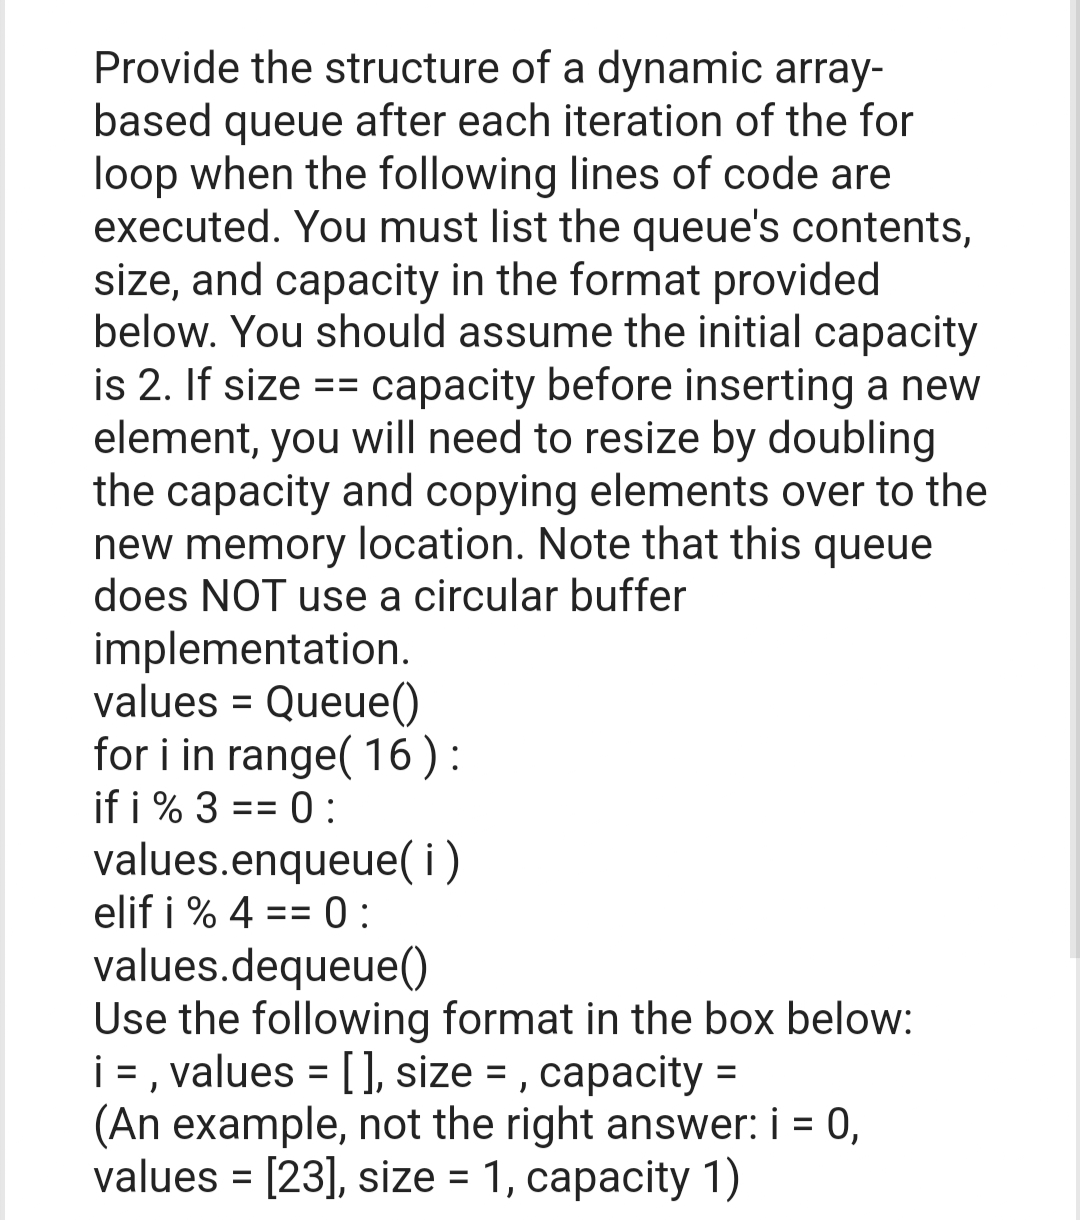 Provide the structure of a dynamic array-
based queue after each iteration of the for
loop when the following lines of code are
executed. You must list the queue's contents,
size, and capacity in the format provided
below. You should assume the initial capacity
is 2. If size == capacity before inserting a new
element, you will need to resize by doubling
the capacity and copying elements over to the
new memory location. Note that this queue
does NOT use a circular buffer
implementation.
values = Queue()
for i in range(16):
if i % 3 == 0:
values.enqueue(i)
elif i % 4 == 0:
values.dequeue()
Use the following format in the box below:
i = , values = [], size=, capacity=
(An example, not the right answer: i = 0,
values = [23], size = 1, capacity 1)